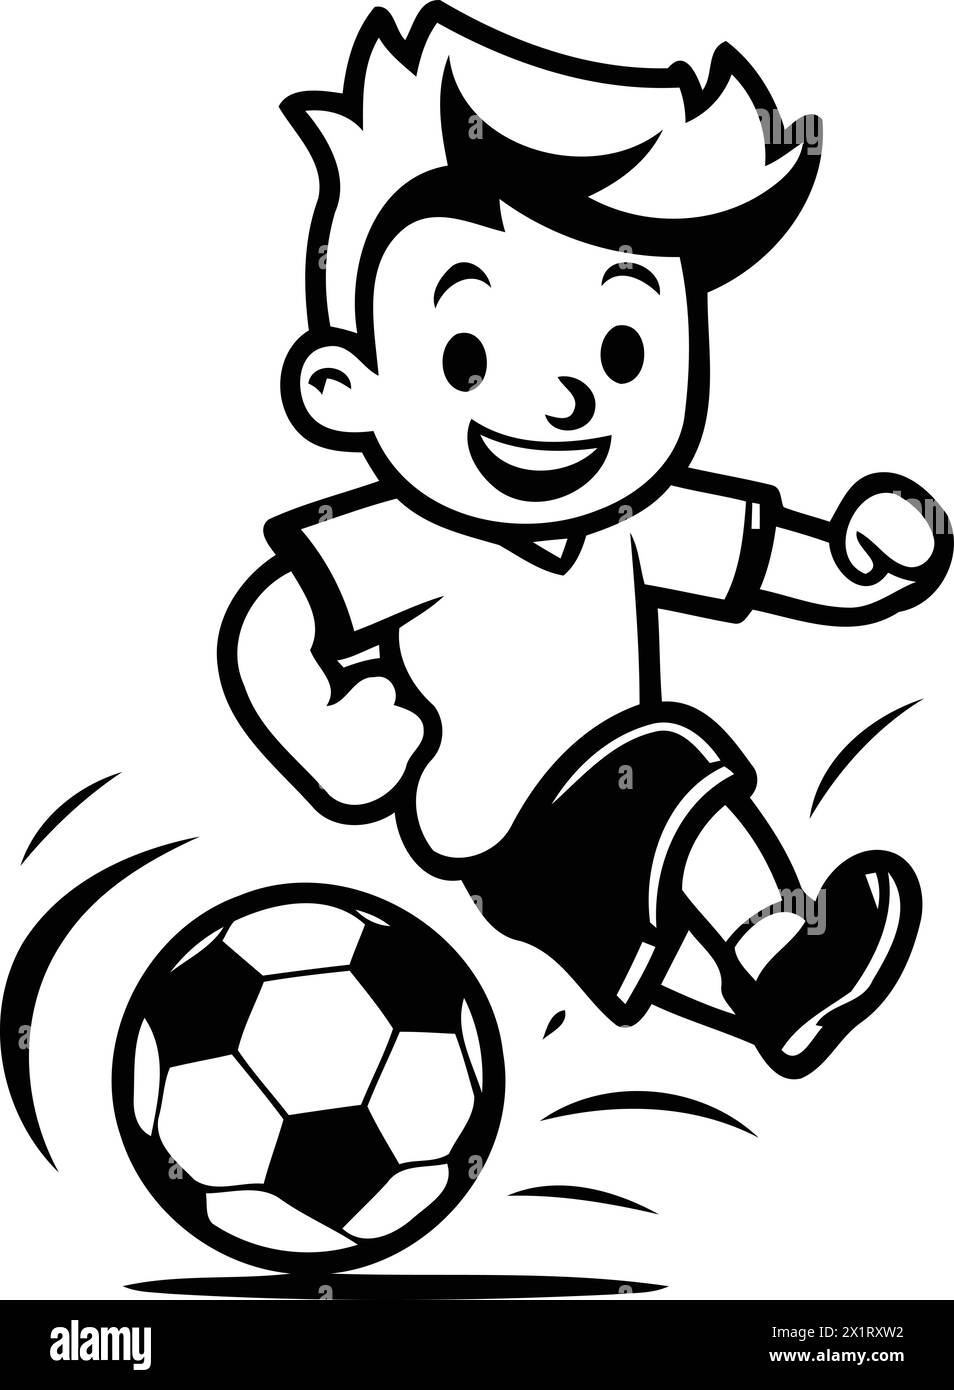 Boy playing soccer cartoon isolated on white background. Design element for logo. label. emblem. sign. Vector illustration Stock Vector